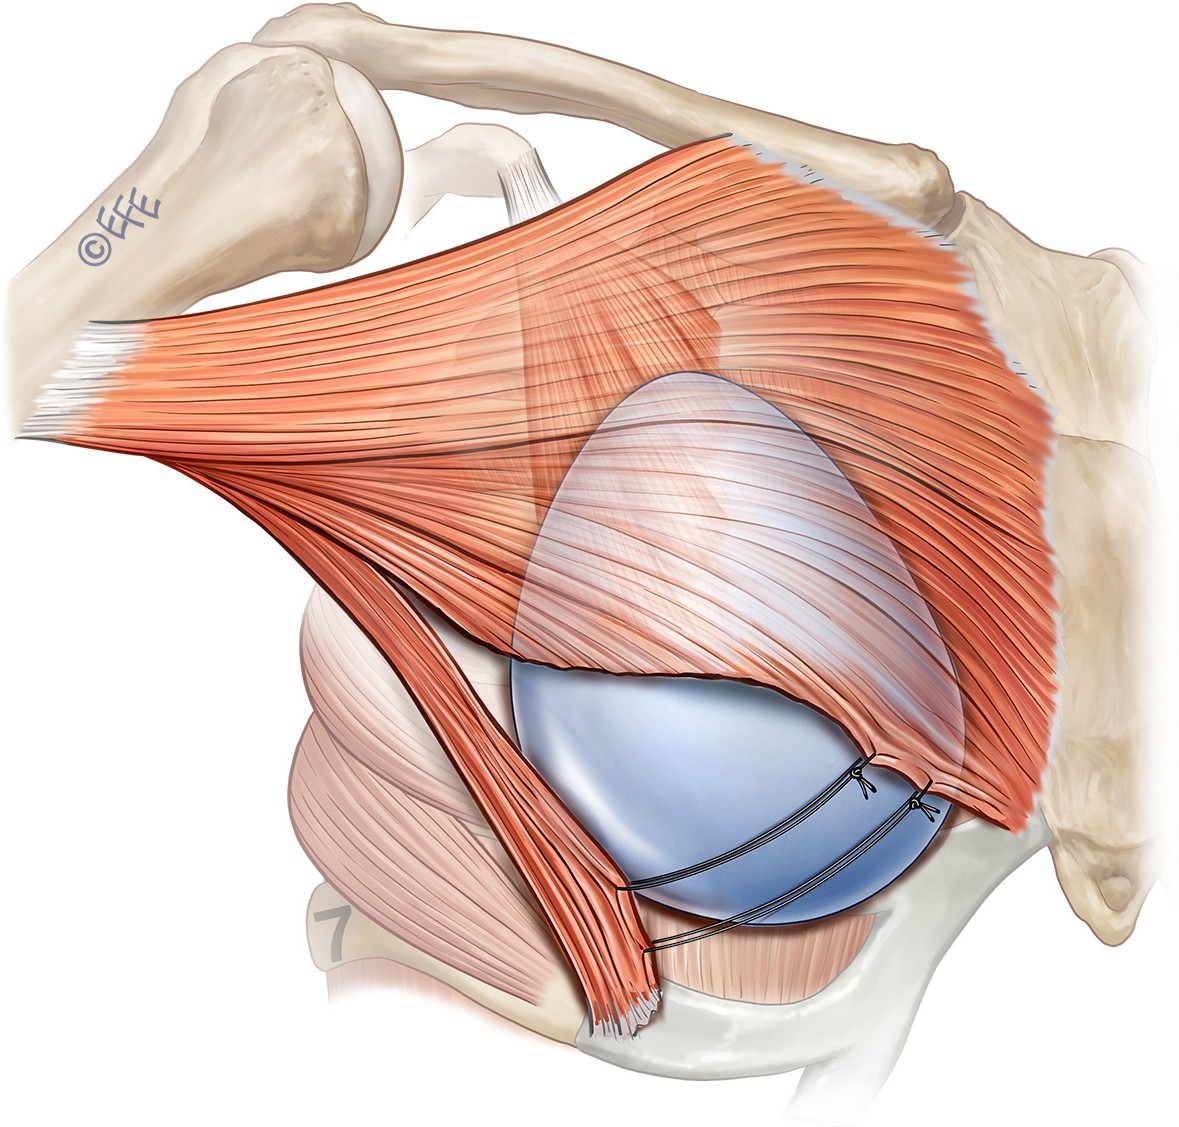 How to perform breast augmentation using a composite myofascial flap